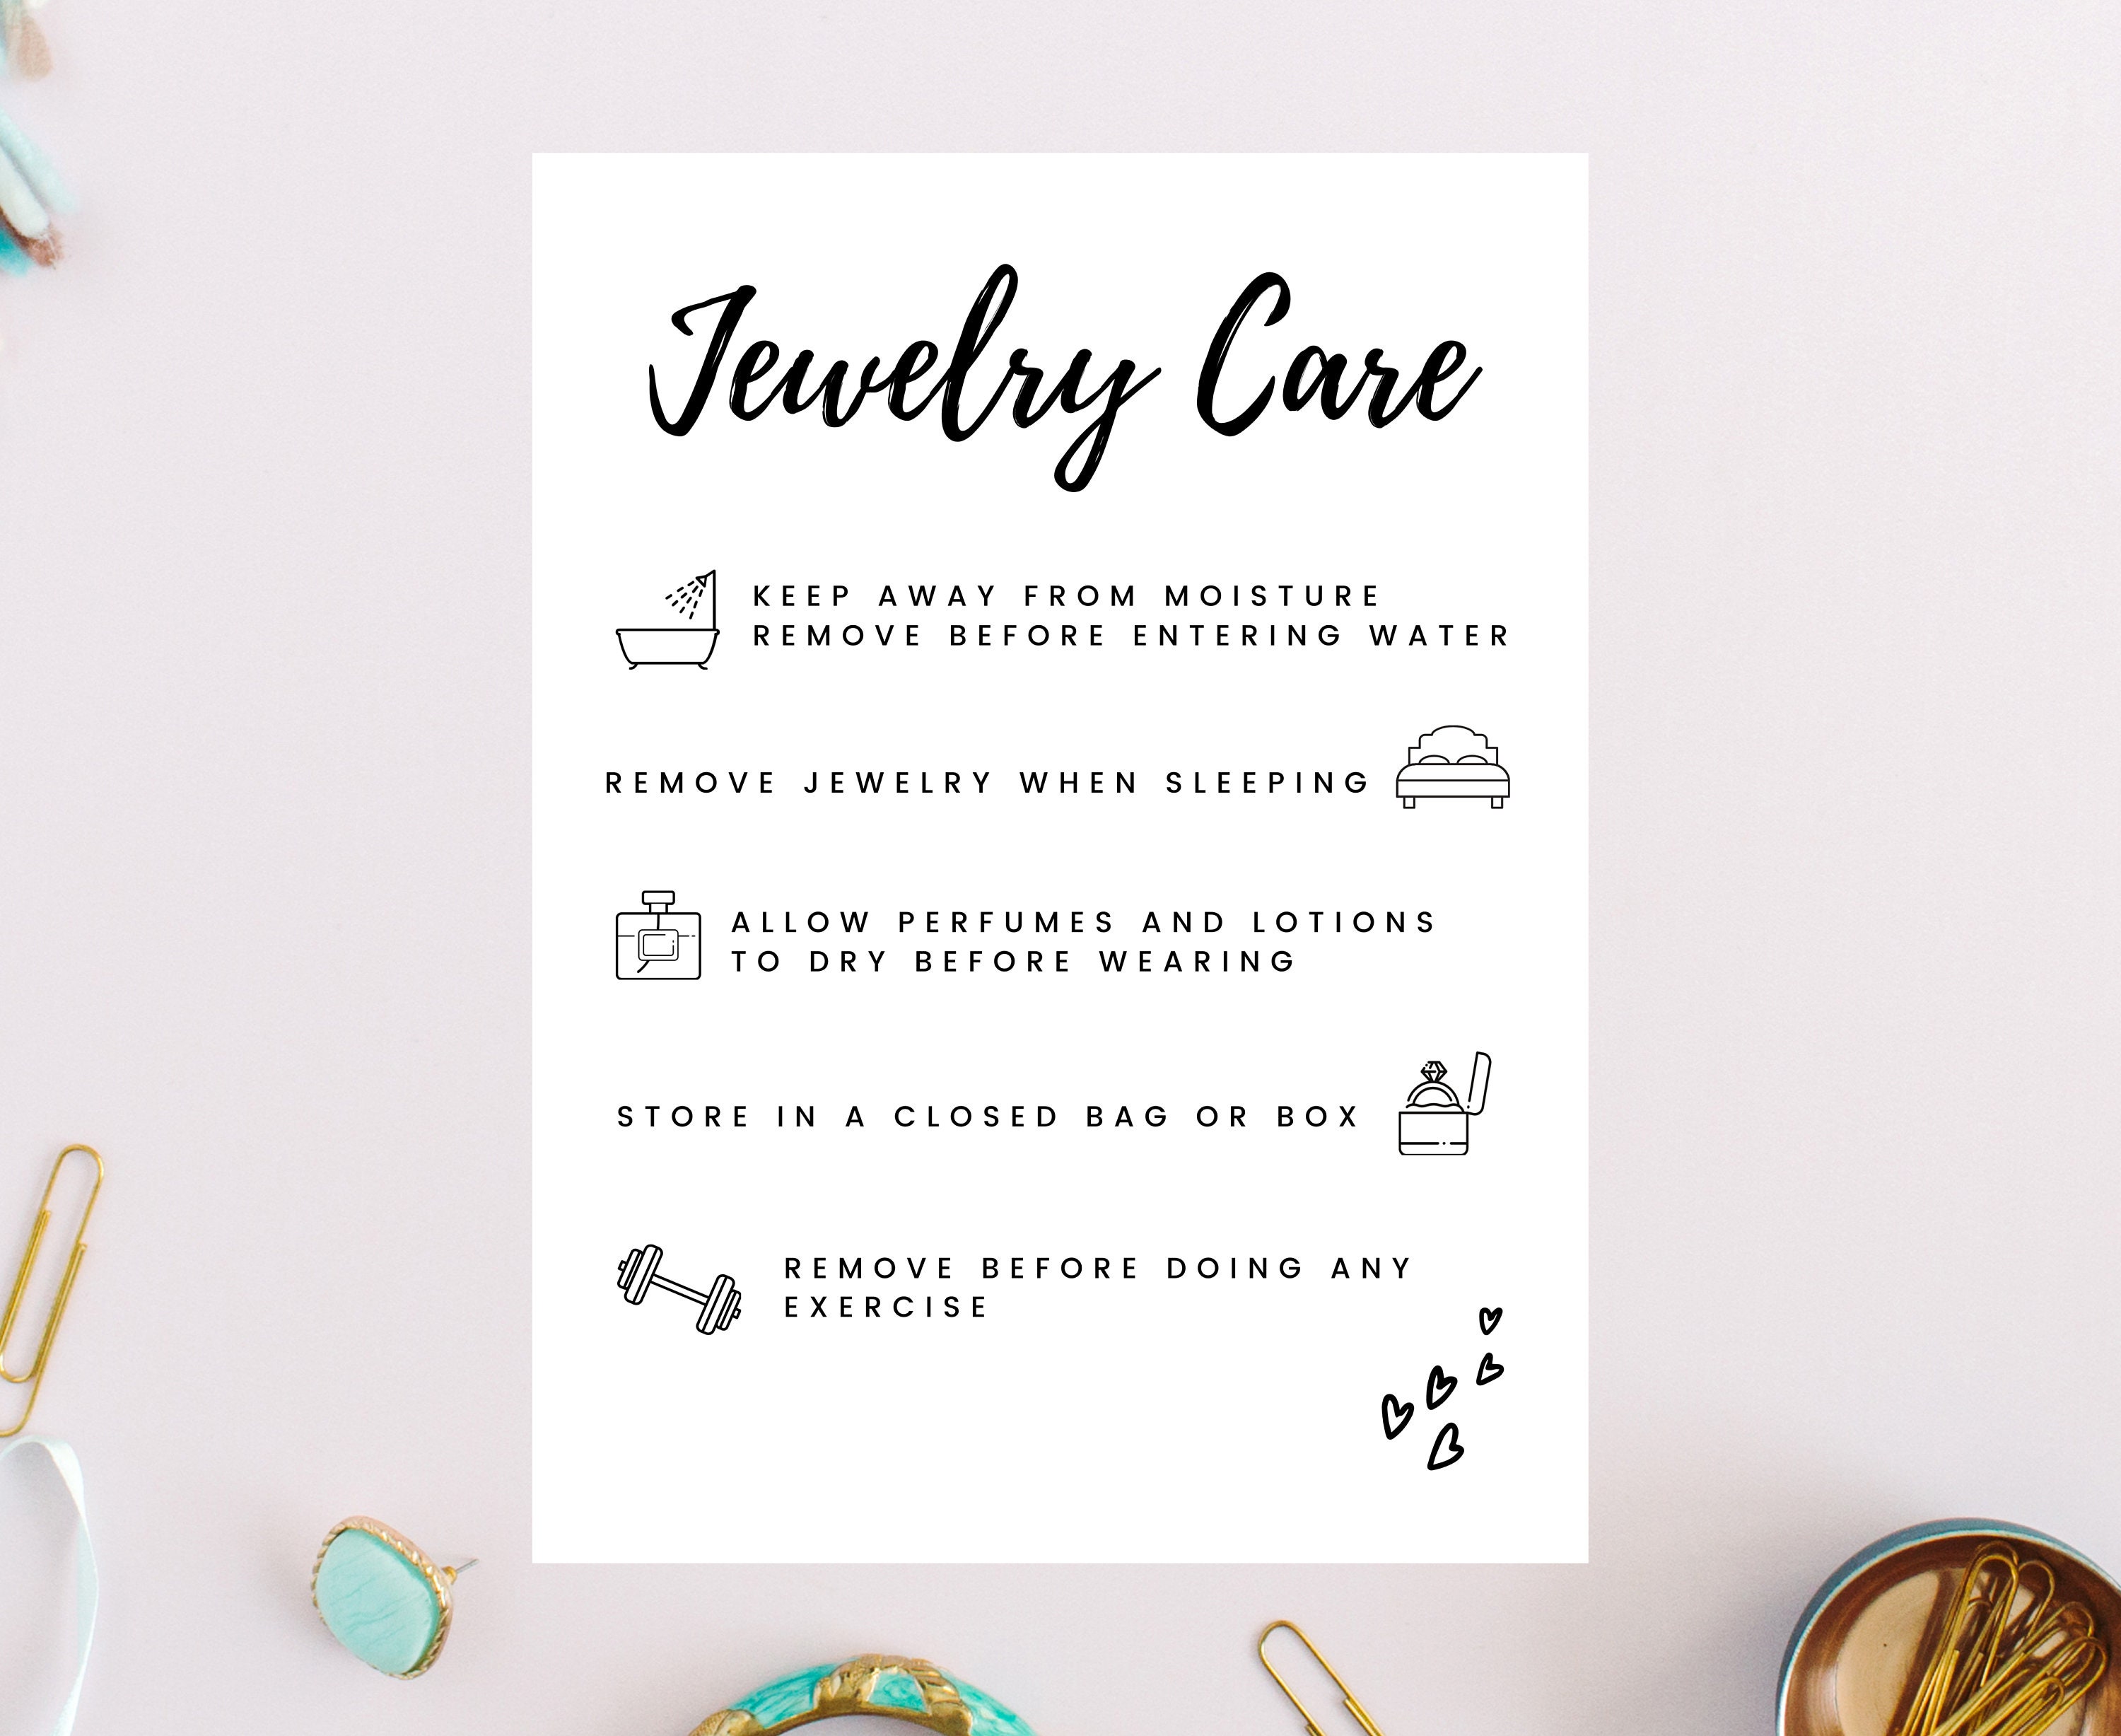 editable-jewelry-care-card-guide-jewelry-care-card-editable-etsy-uk